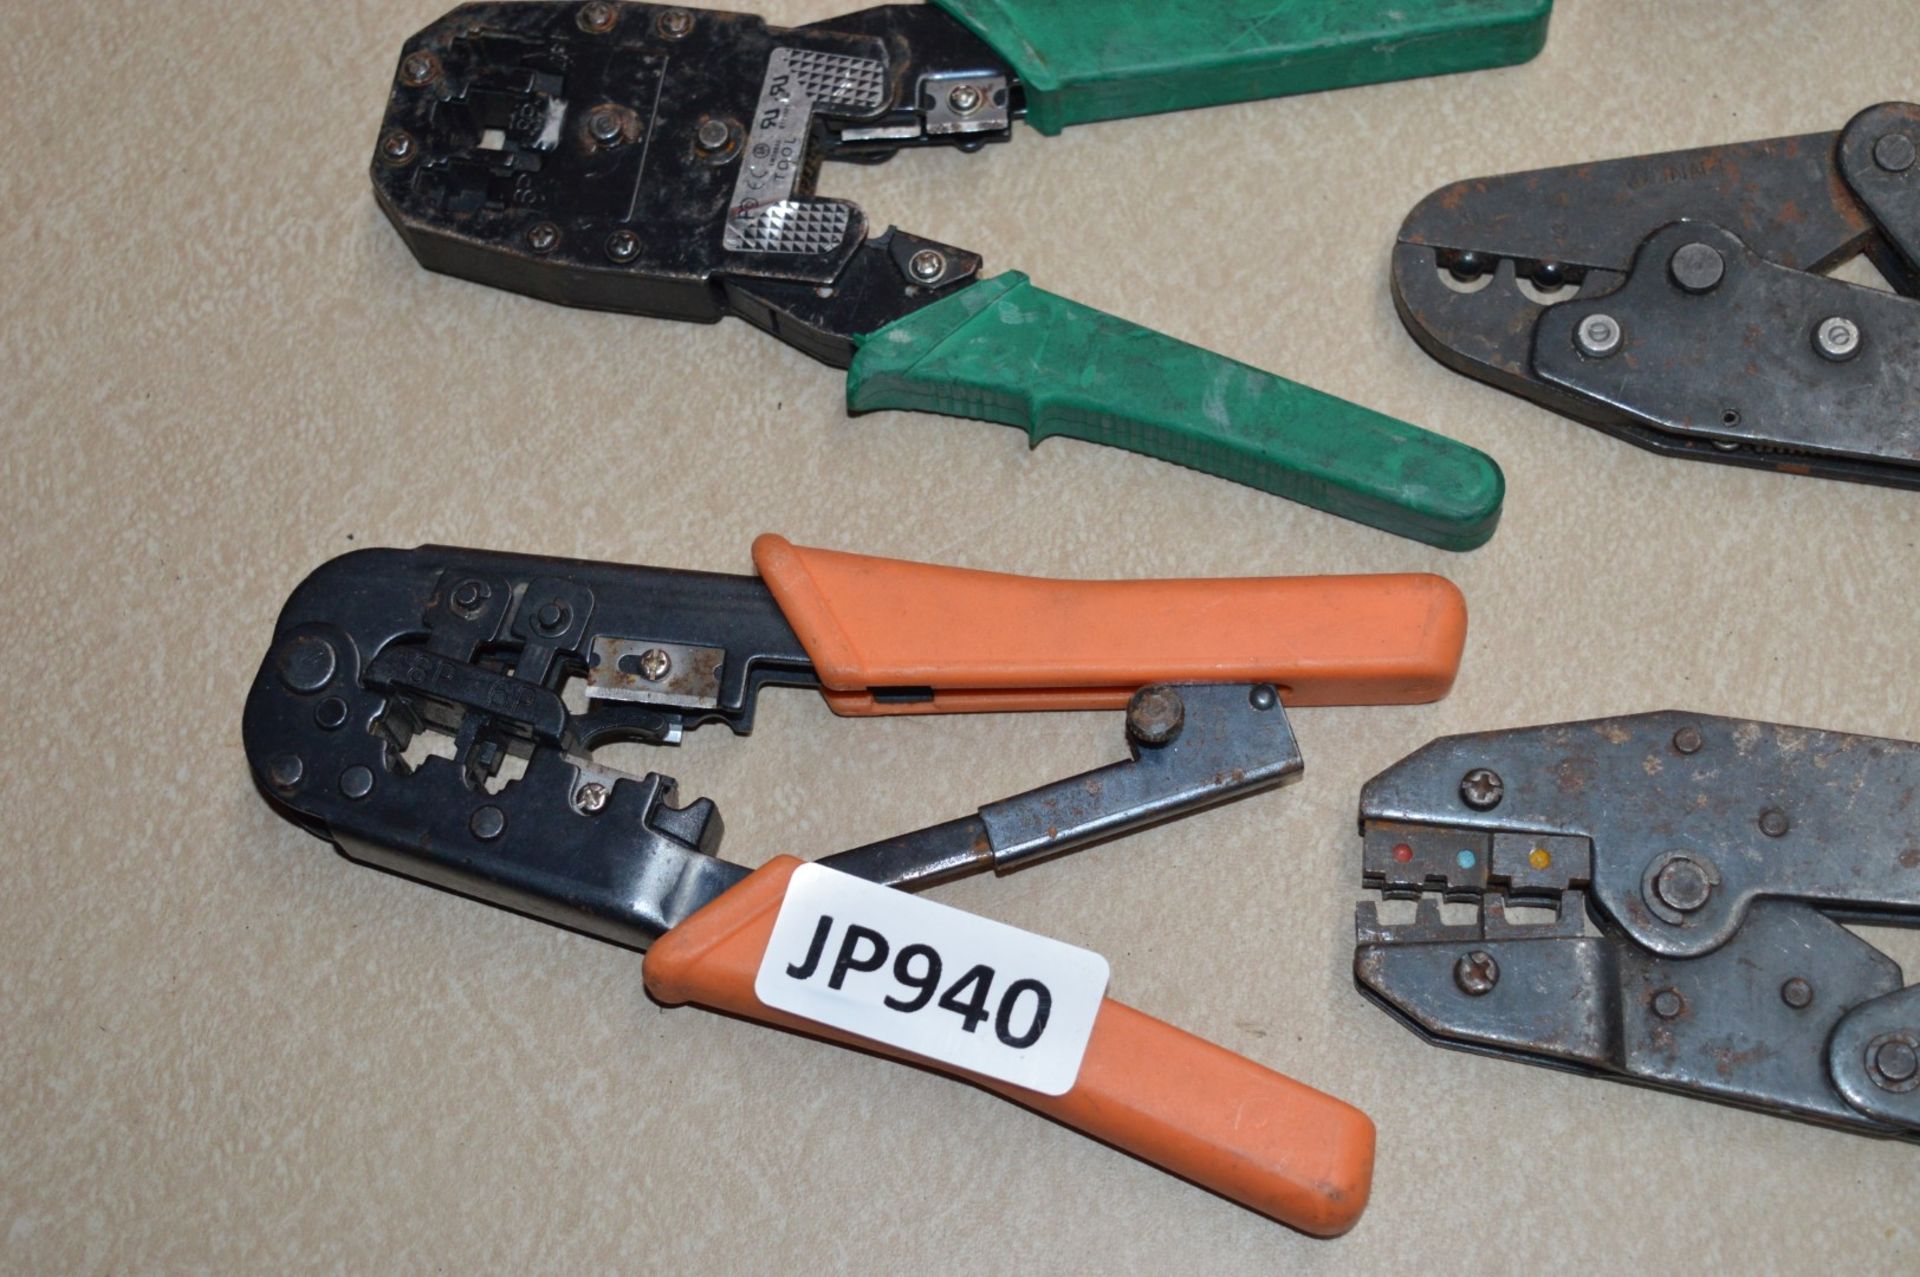 6 x Various Crimping Tools For Telecoms and Network Applications - CL011 - Ref JP940 - Location: - Image 2 of 5